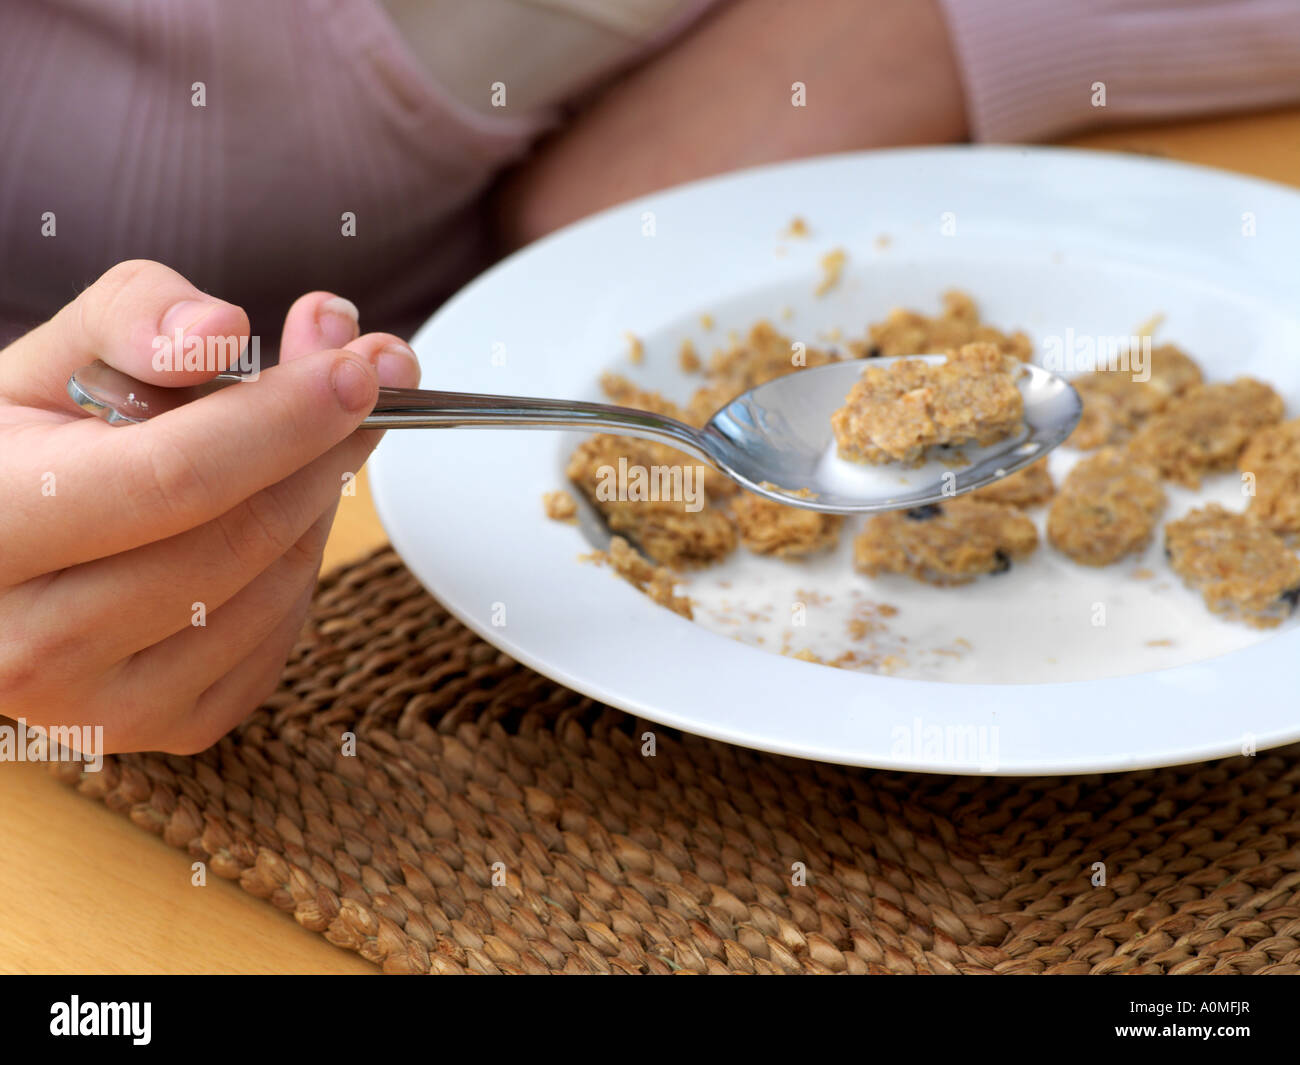 Teenager Eating Cereal for Breakfast Stock Photo